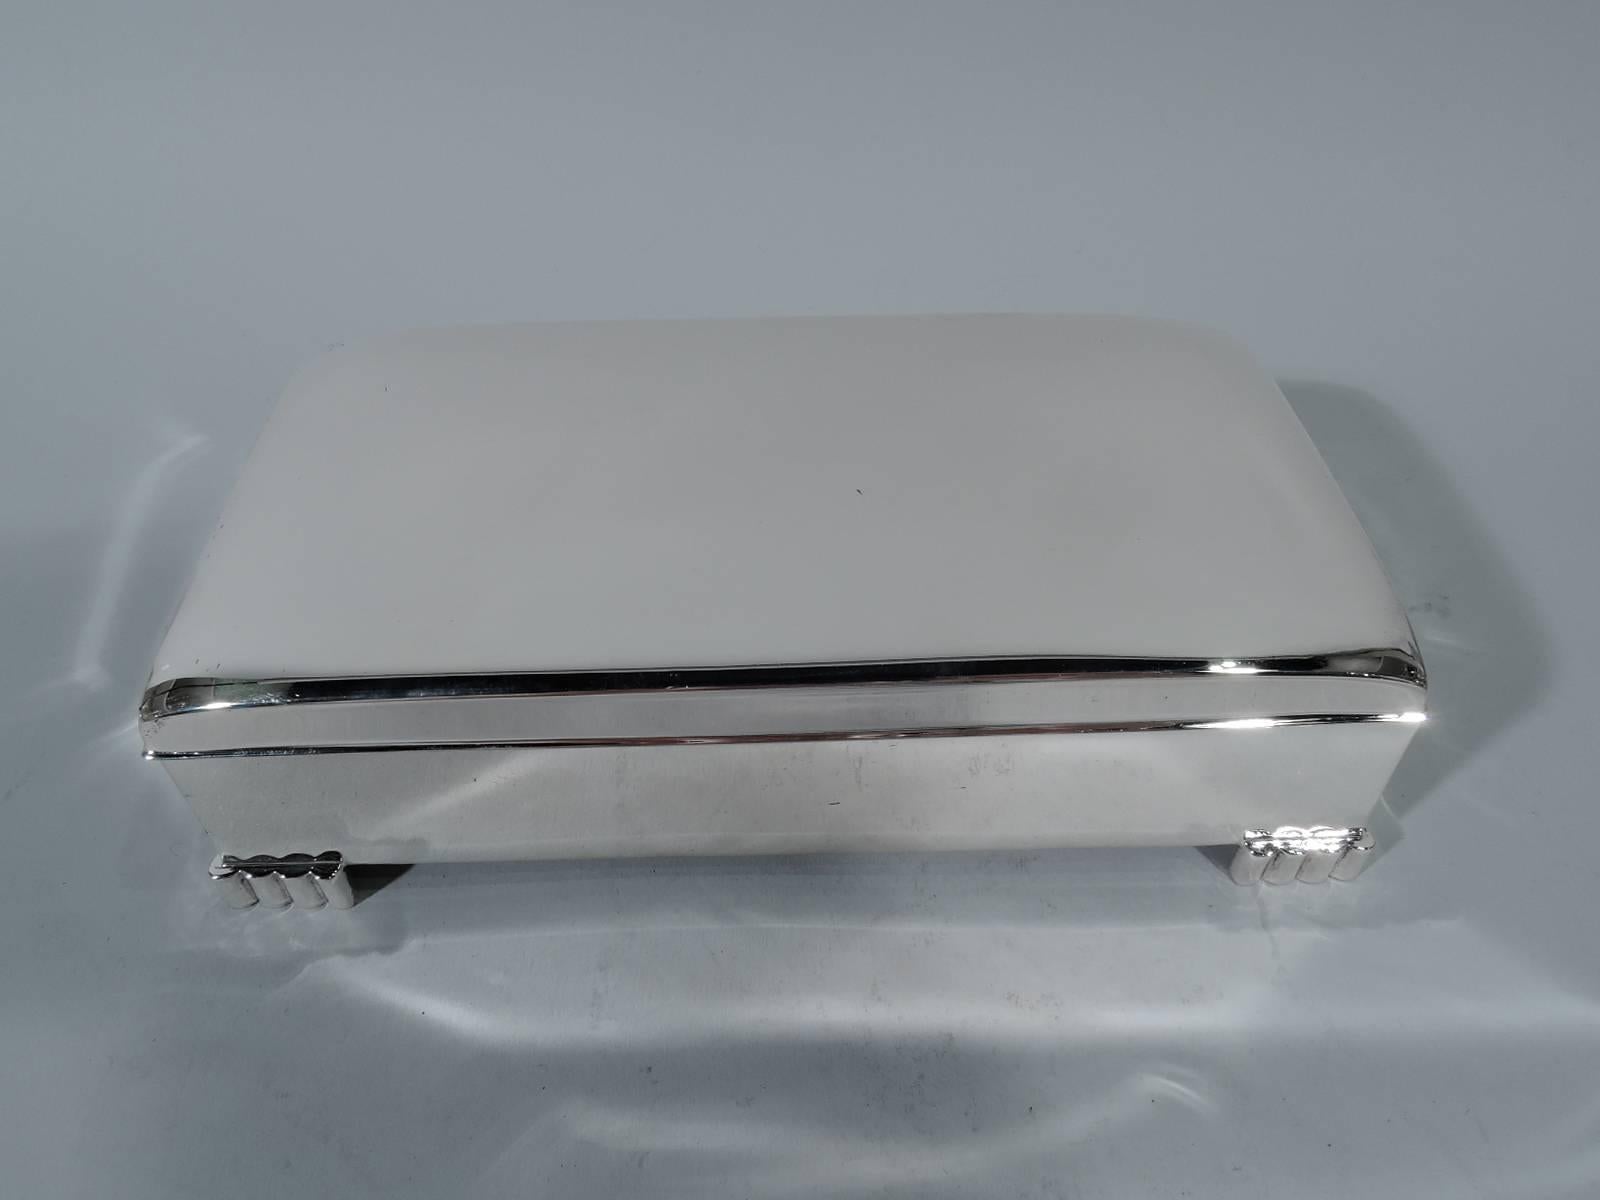 Mid-Century Modern sterling silver box. Made by Poole in Taunton, Mass. Rectangular with straight sides and lobed corner bracket feet. Cover hinged and curved. Box and cover interior cedar lined. Box underside leather lined. Hallmark includes no.